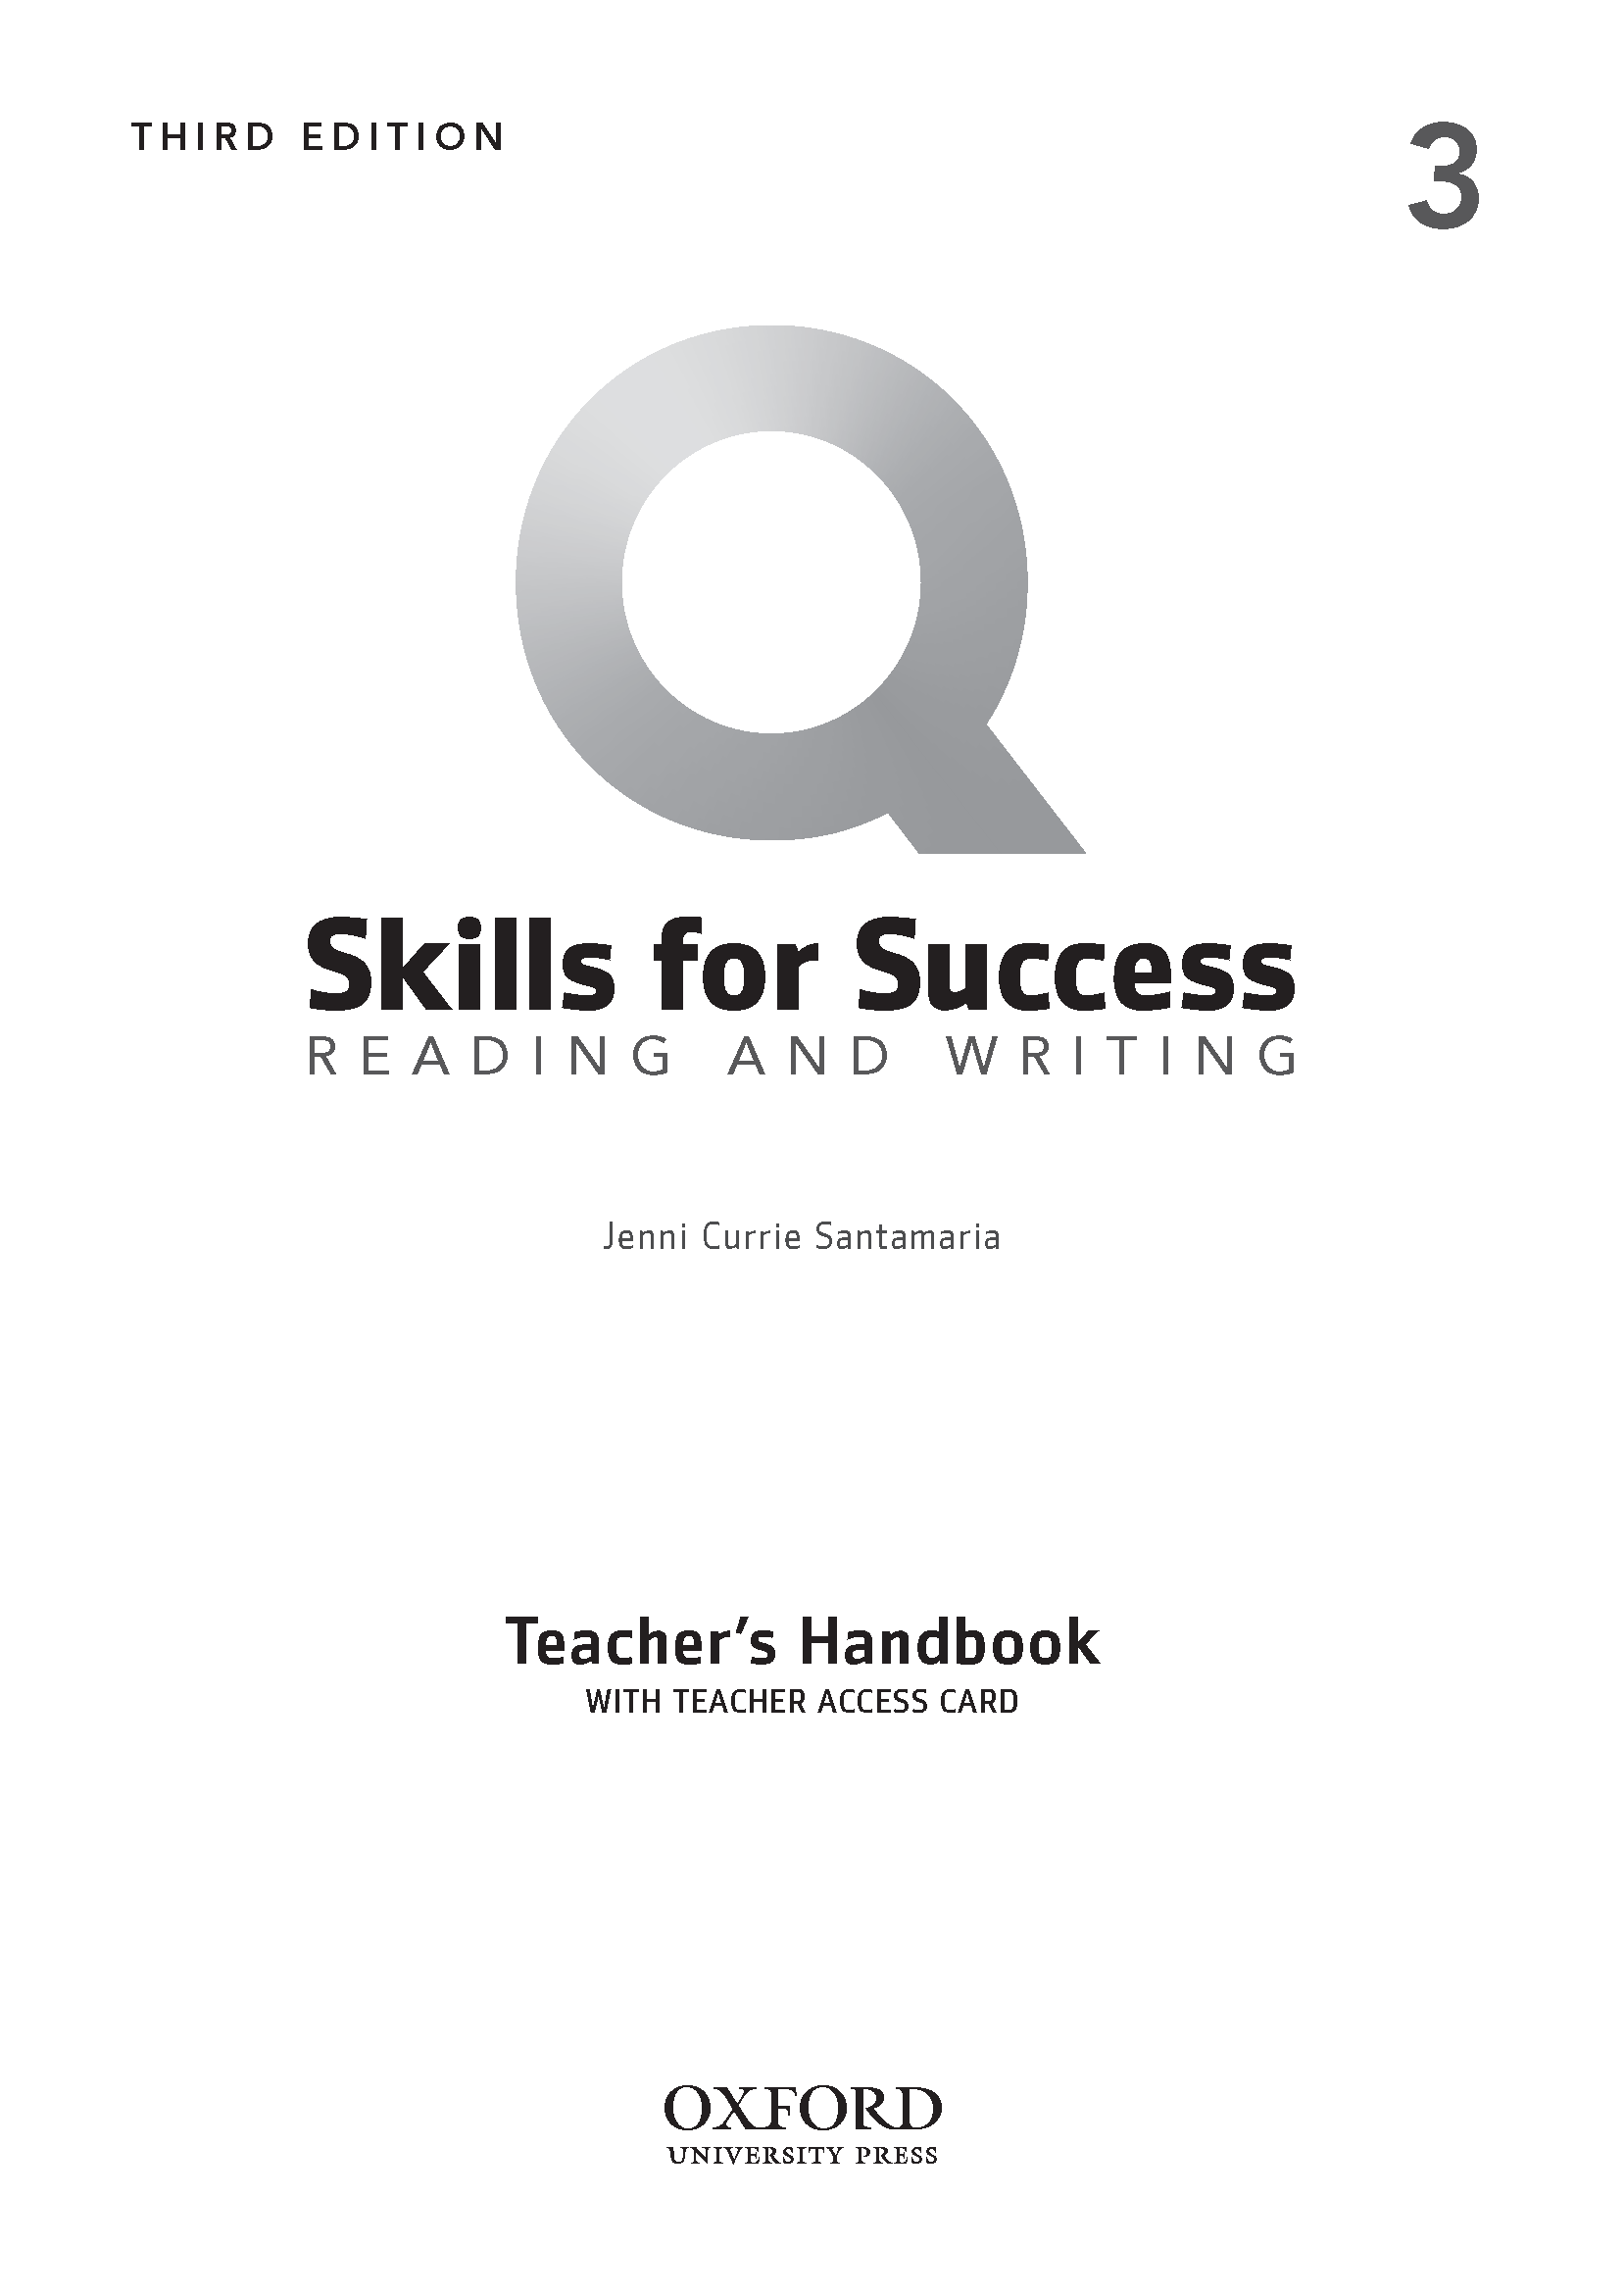 DOWNLOAD PDF] Q:Skills for Success Level 3 Reading and Writing